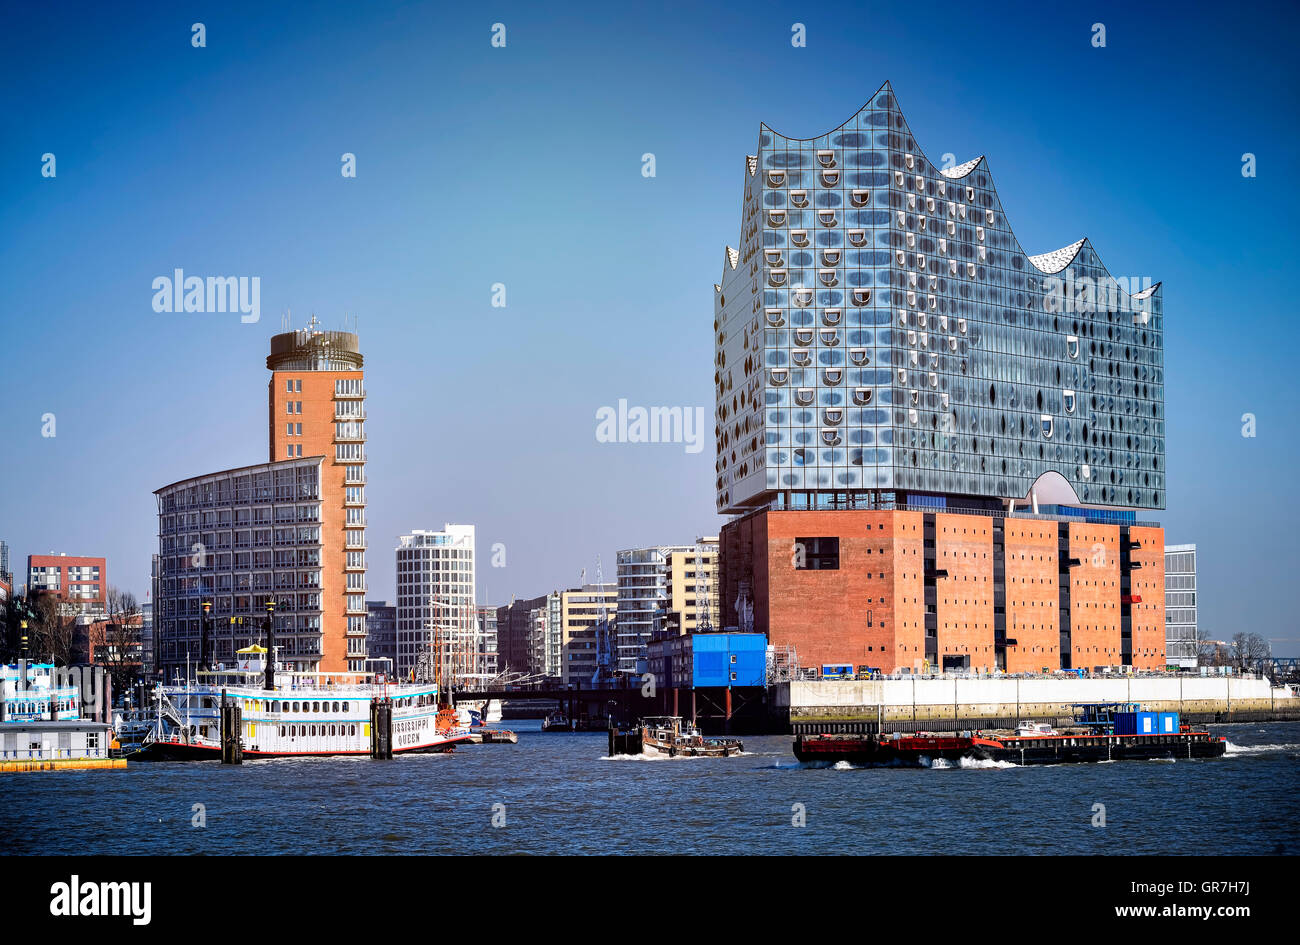 Elbe Philharmonic Hall High Resolution Stock Photography and Images - Alamy